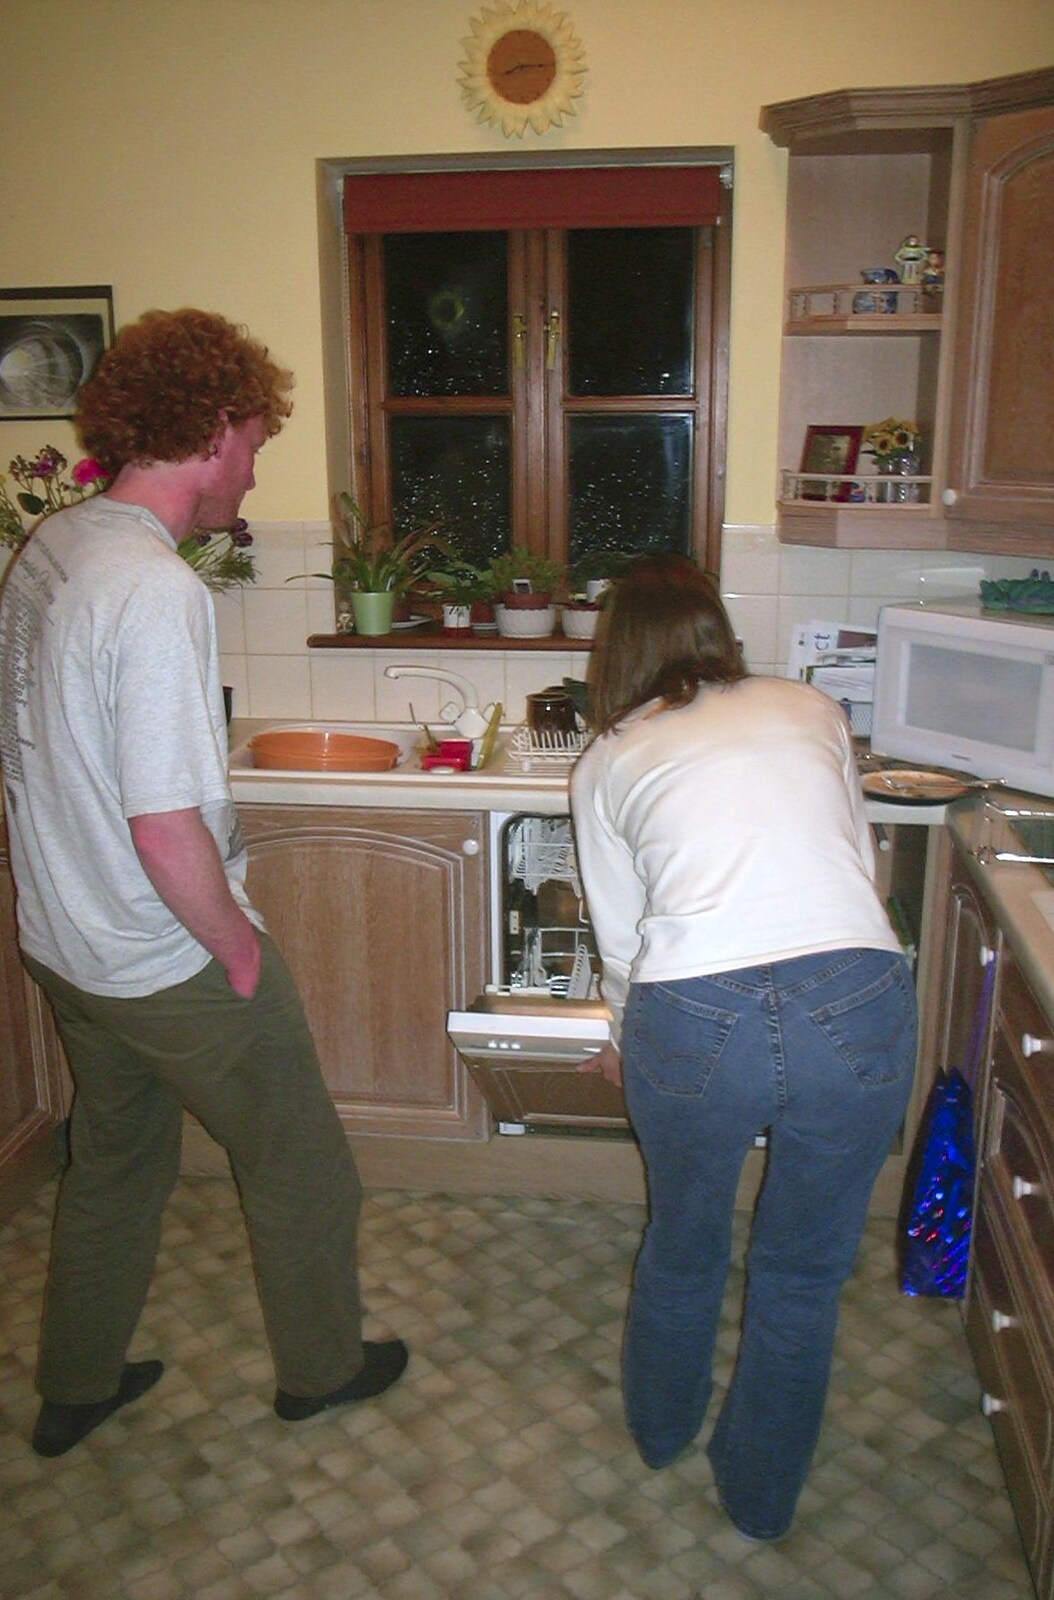 Wavy is given an introduction to the dishwasher from Suey's Actual Birthday, Thorndon, Suffolk - 2nd April 2002